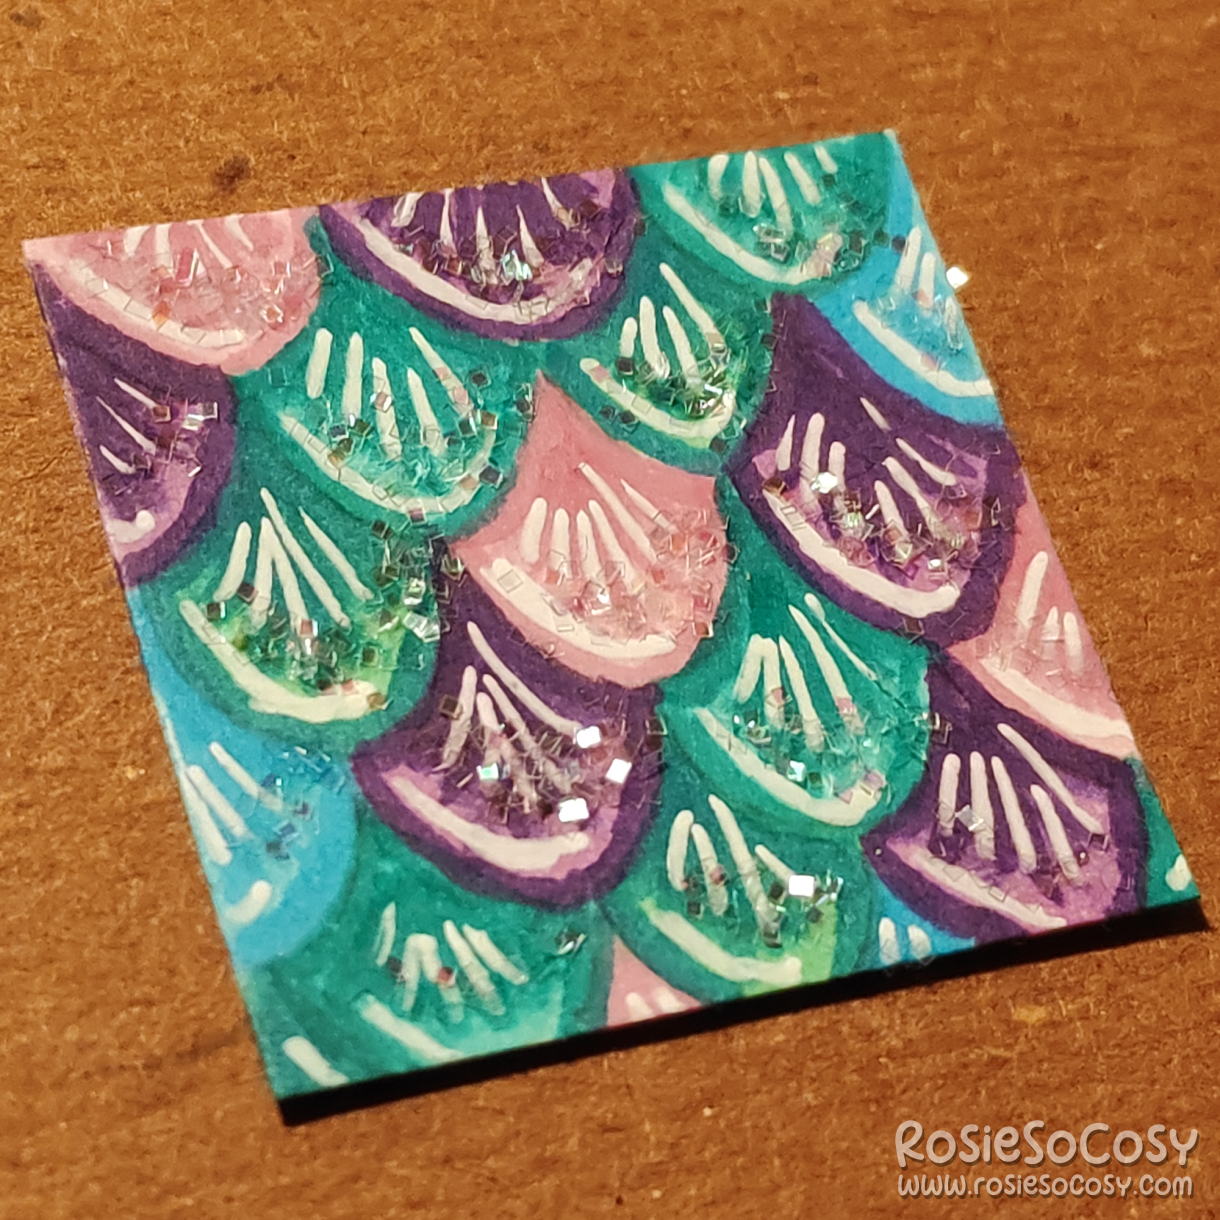 An inch sized drawing of teal, blue, purple and pink mermaid scales. There's some glitter on them.